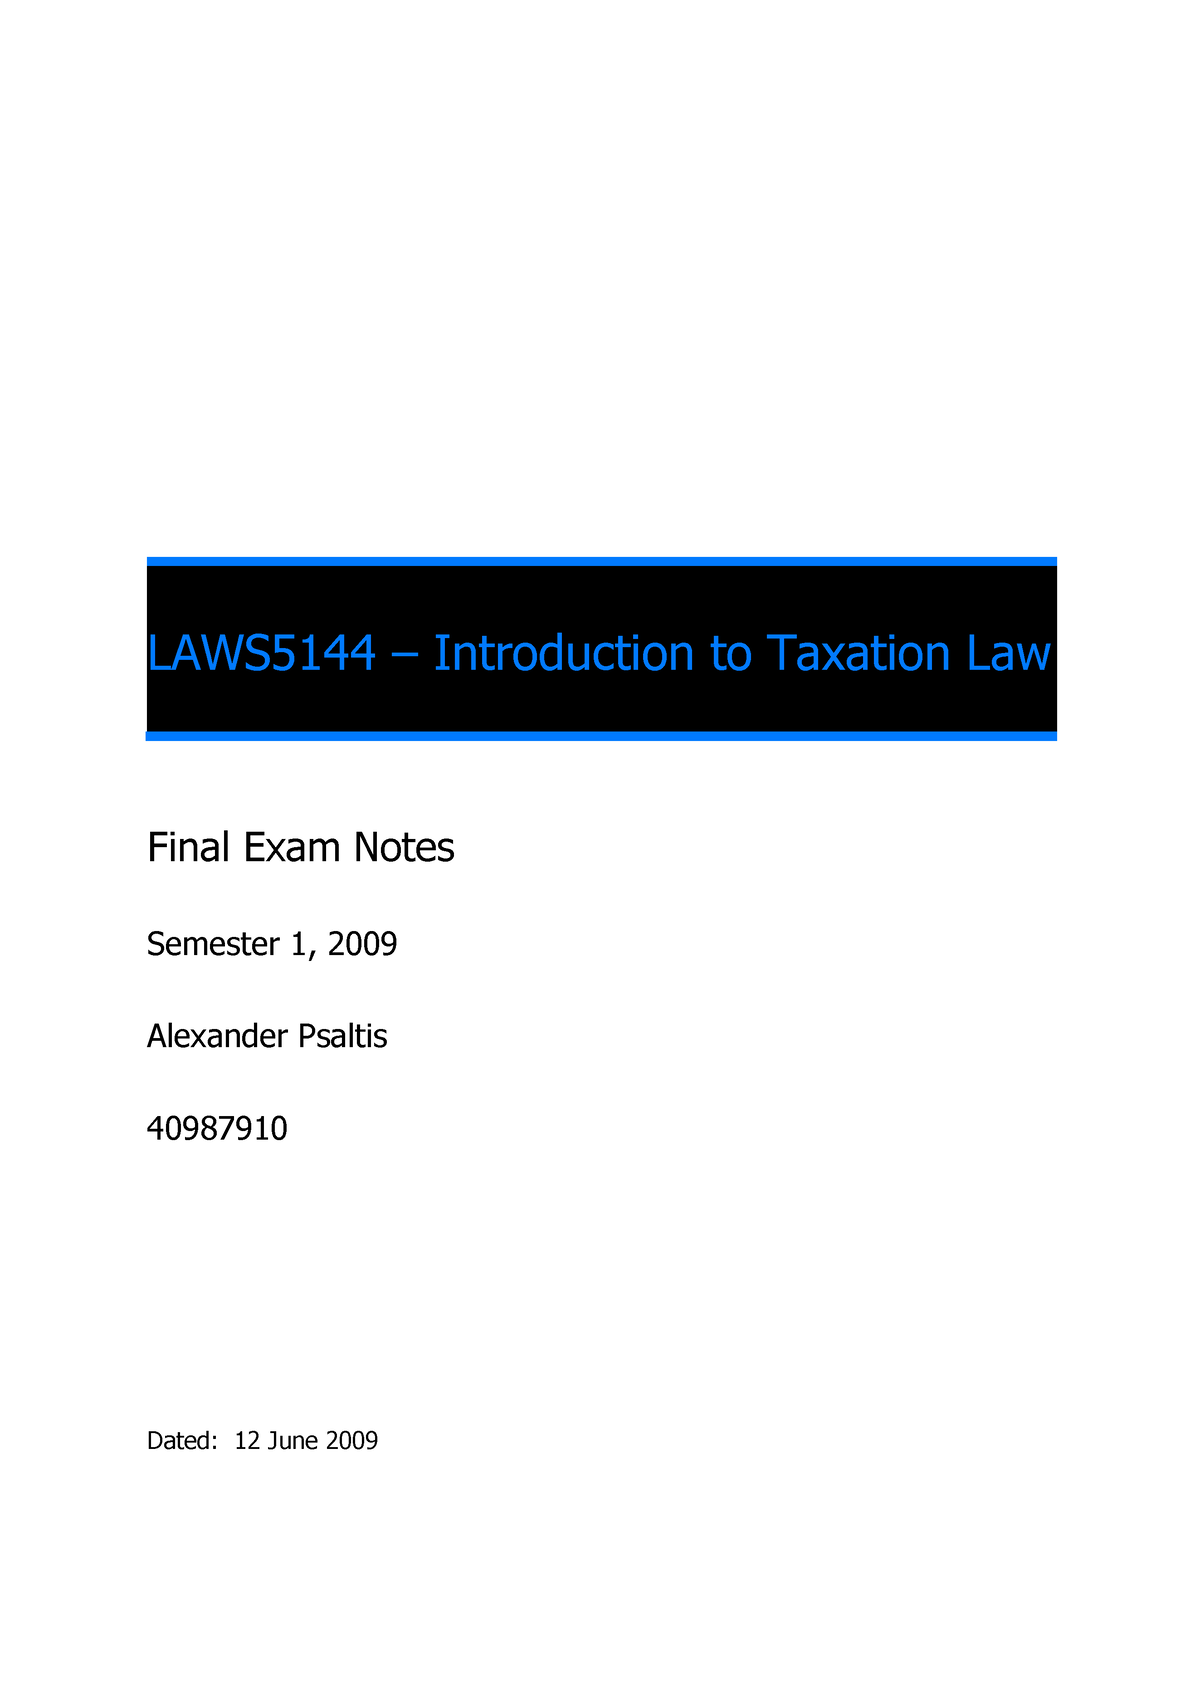 phd thesis tax law